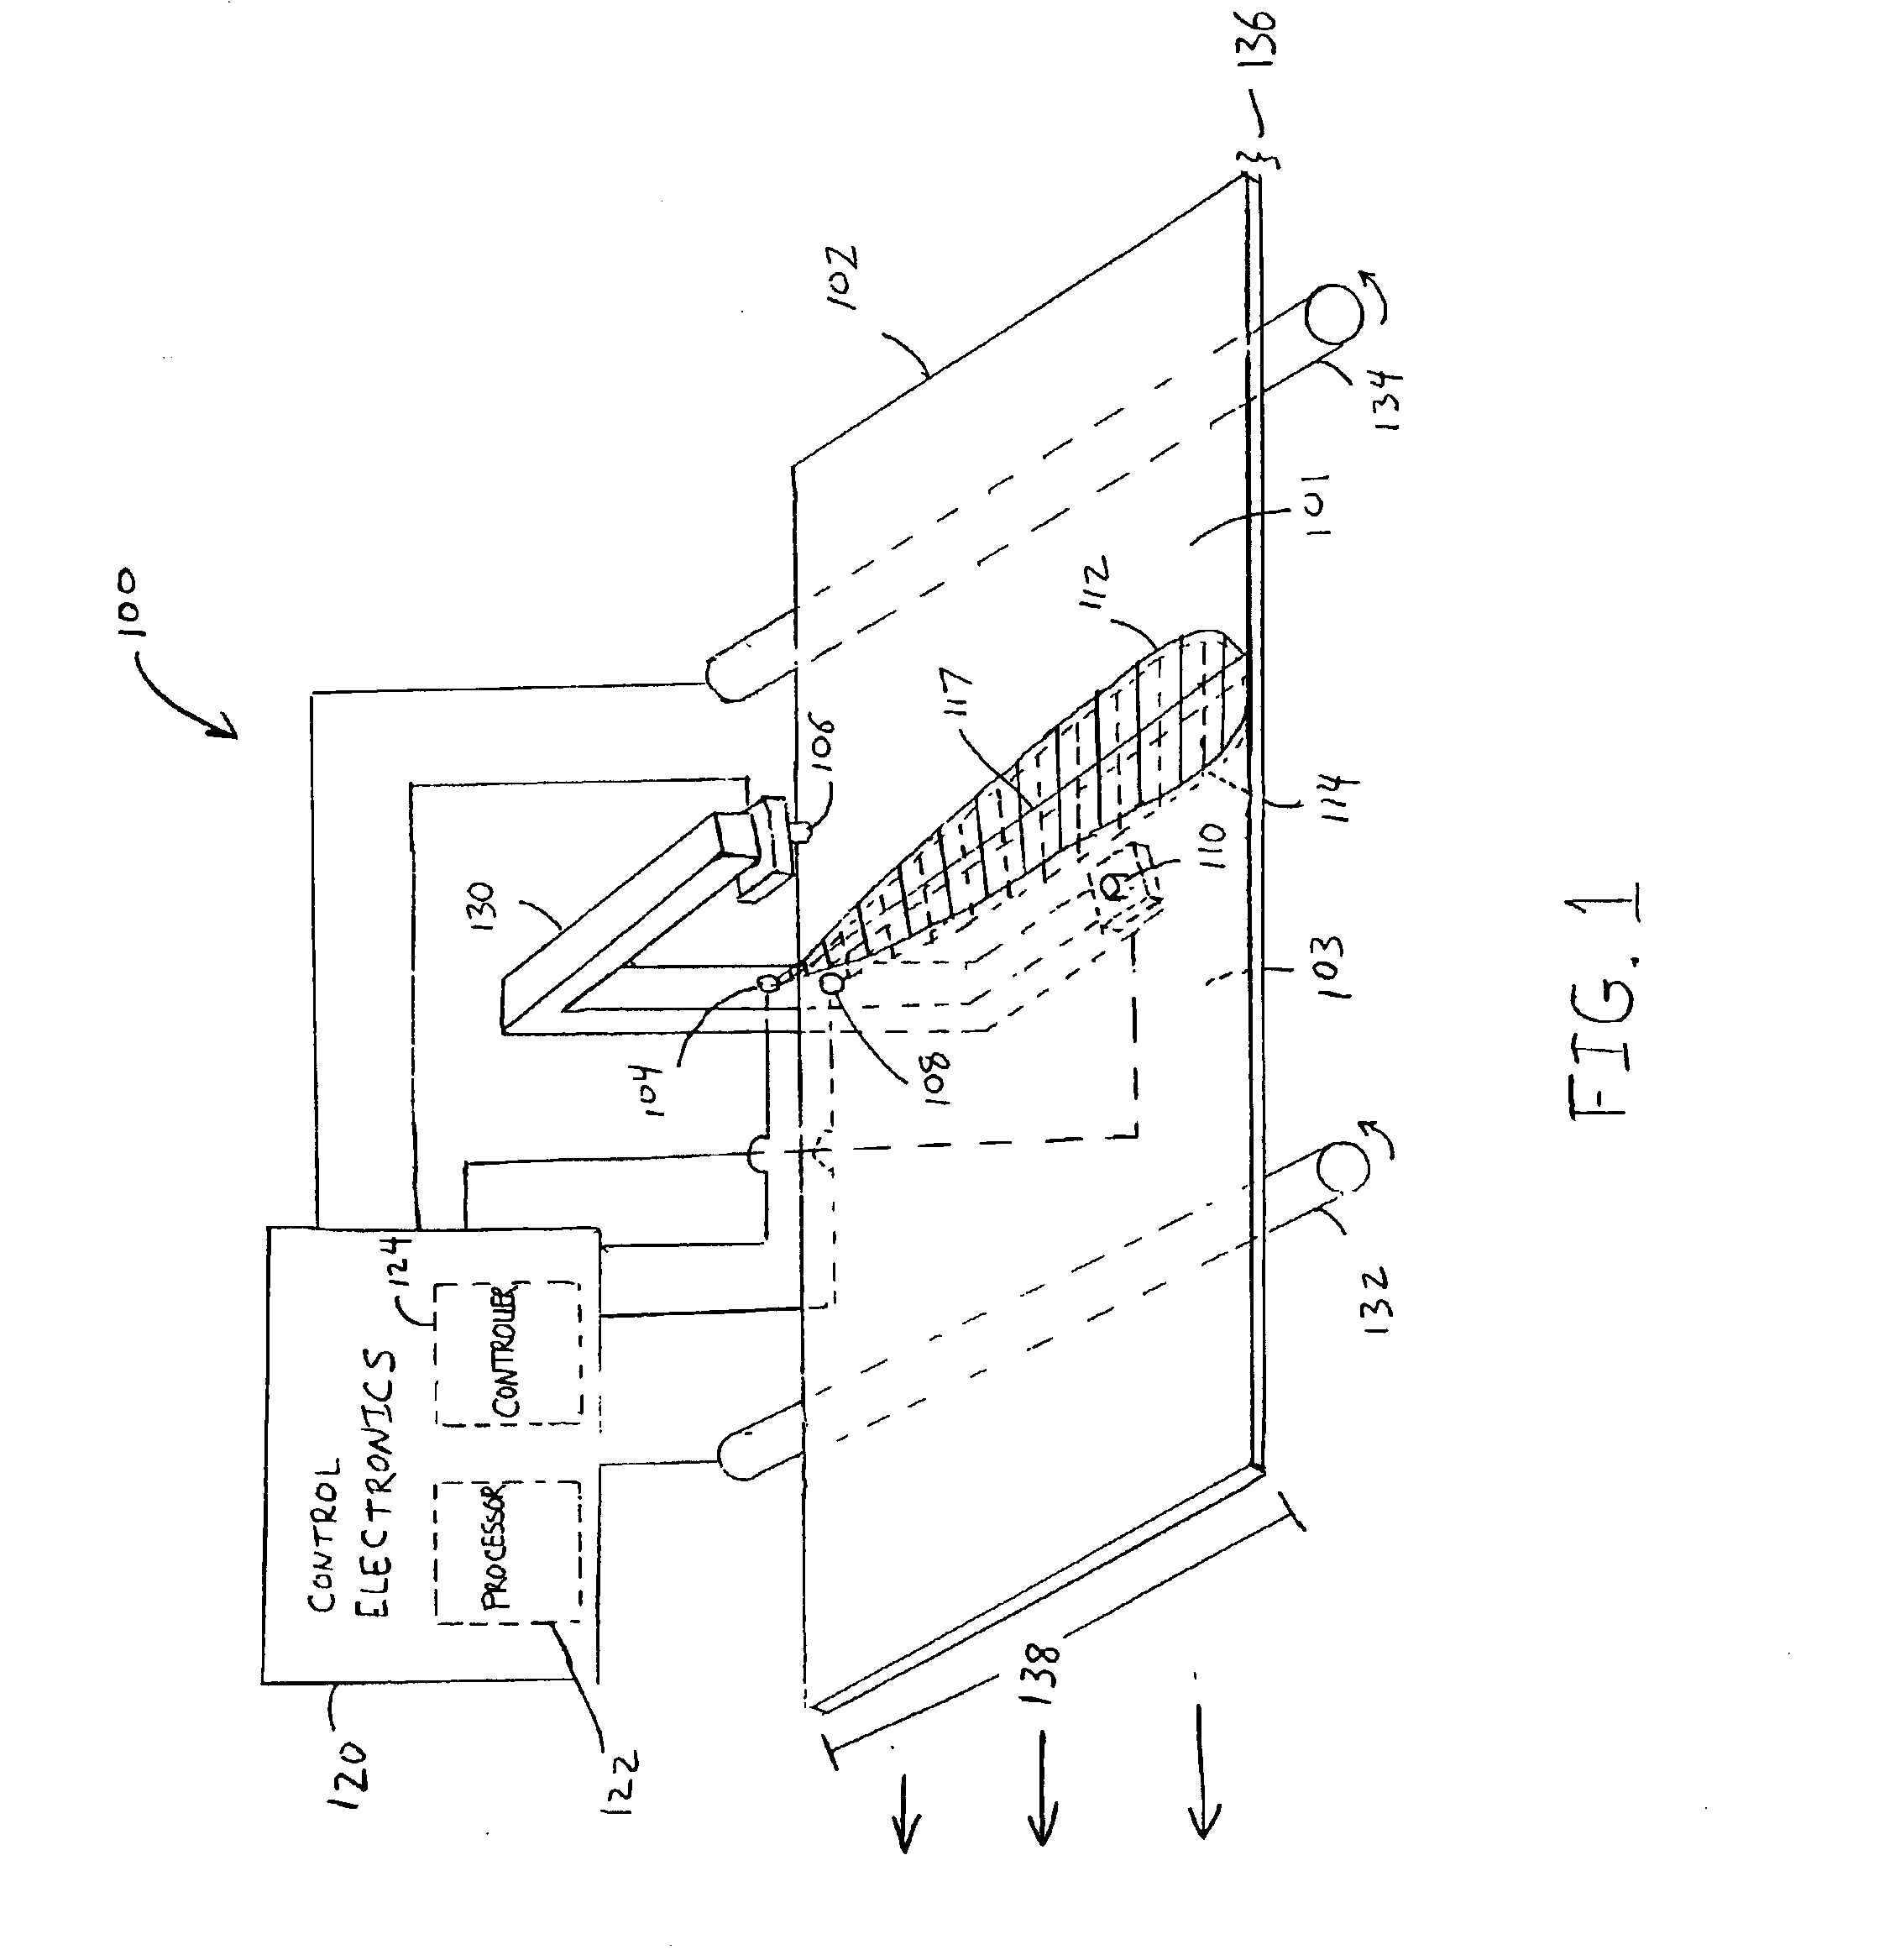 Apparatus and methods for optically monitoring thickness